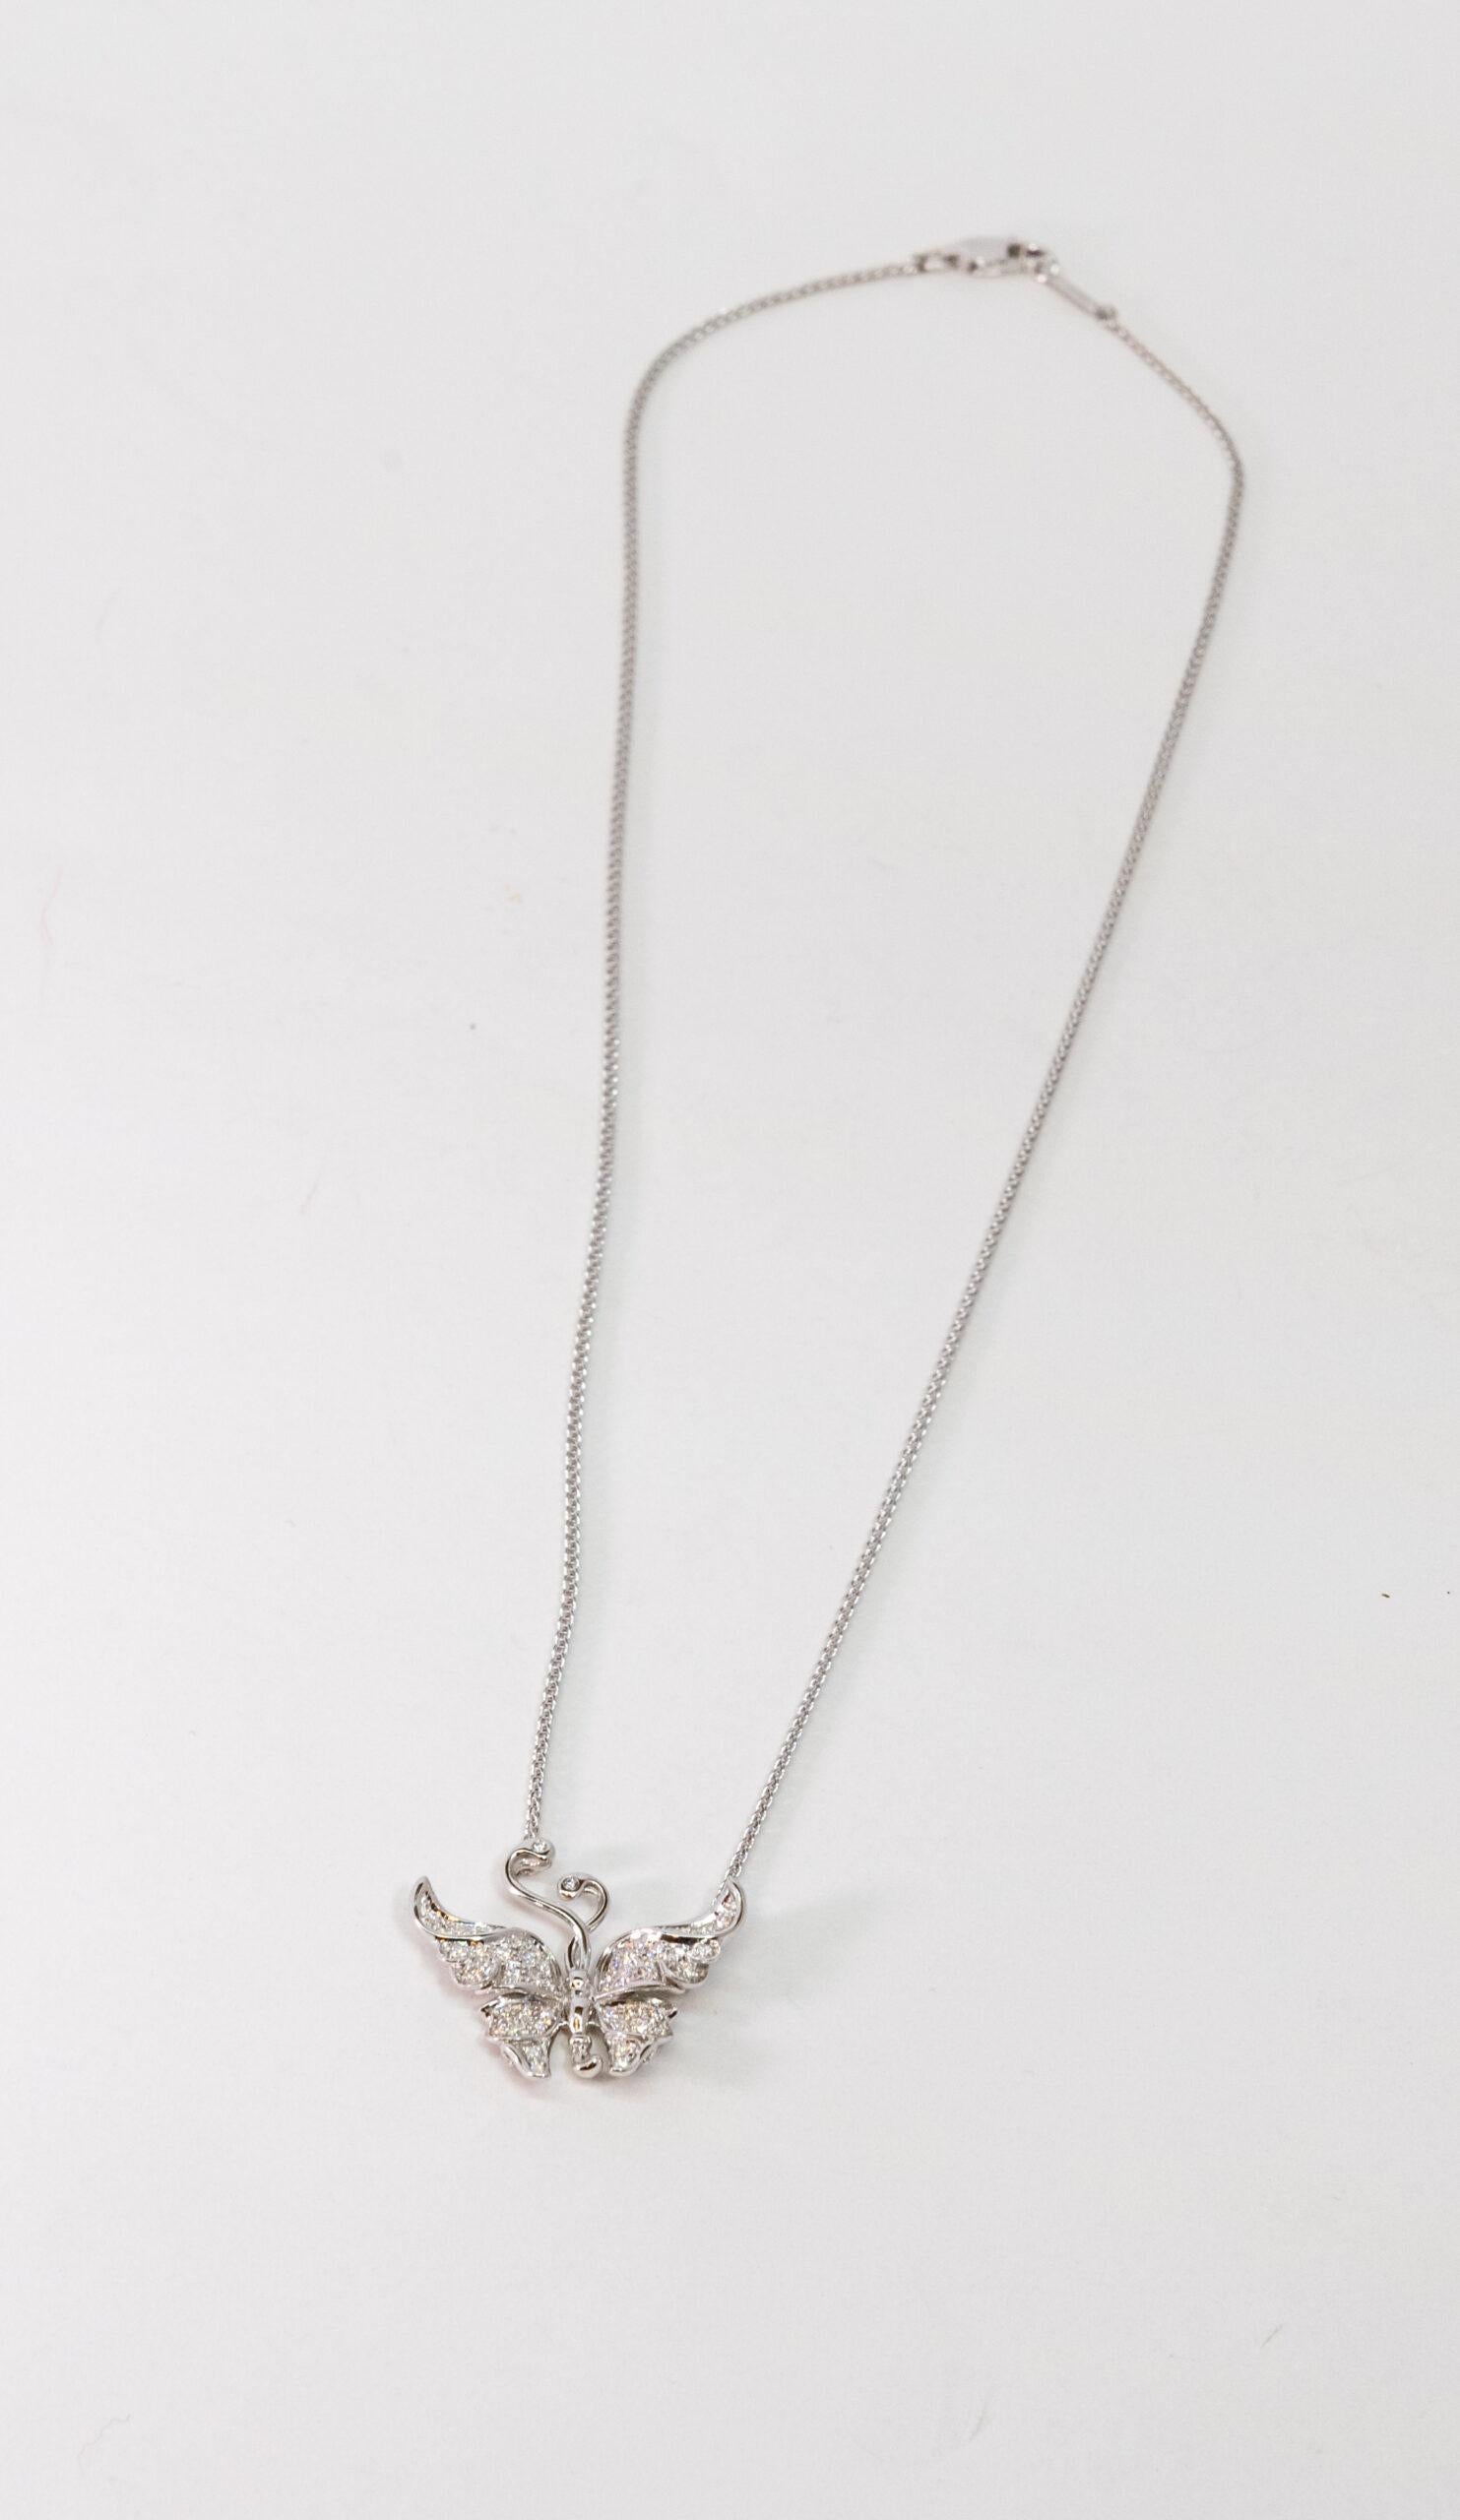 Carrera y Carrera  18K White Gold pendant. 18K White Gold cable chain with lobster claw lock. Butterfly-shaped pendant paved with Diamonds (~0.35ct)

Chain Length: 23 cm

Pendant dimensions: 2.5 x 2.7 cm